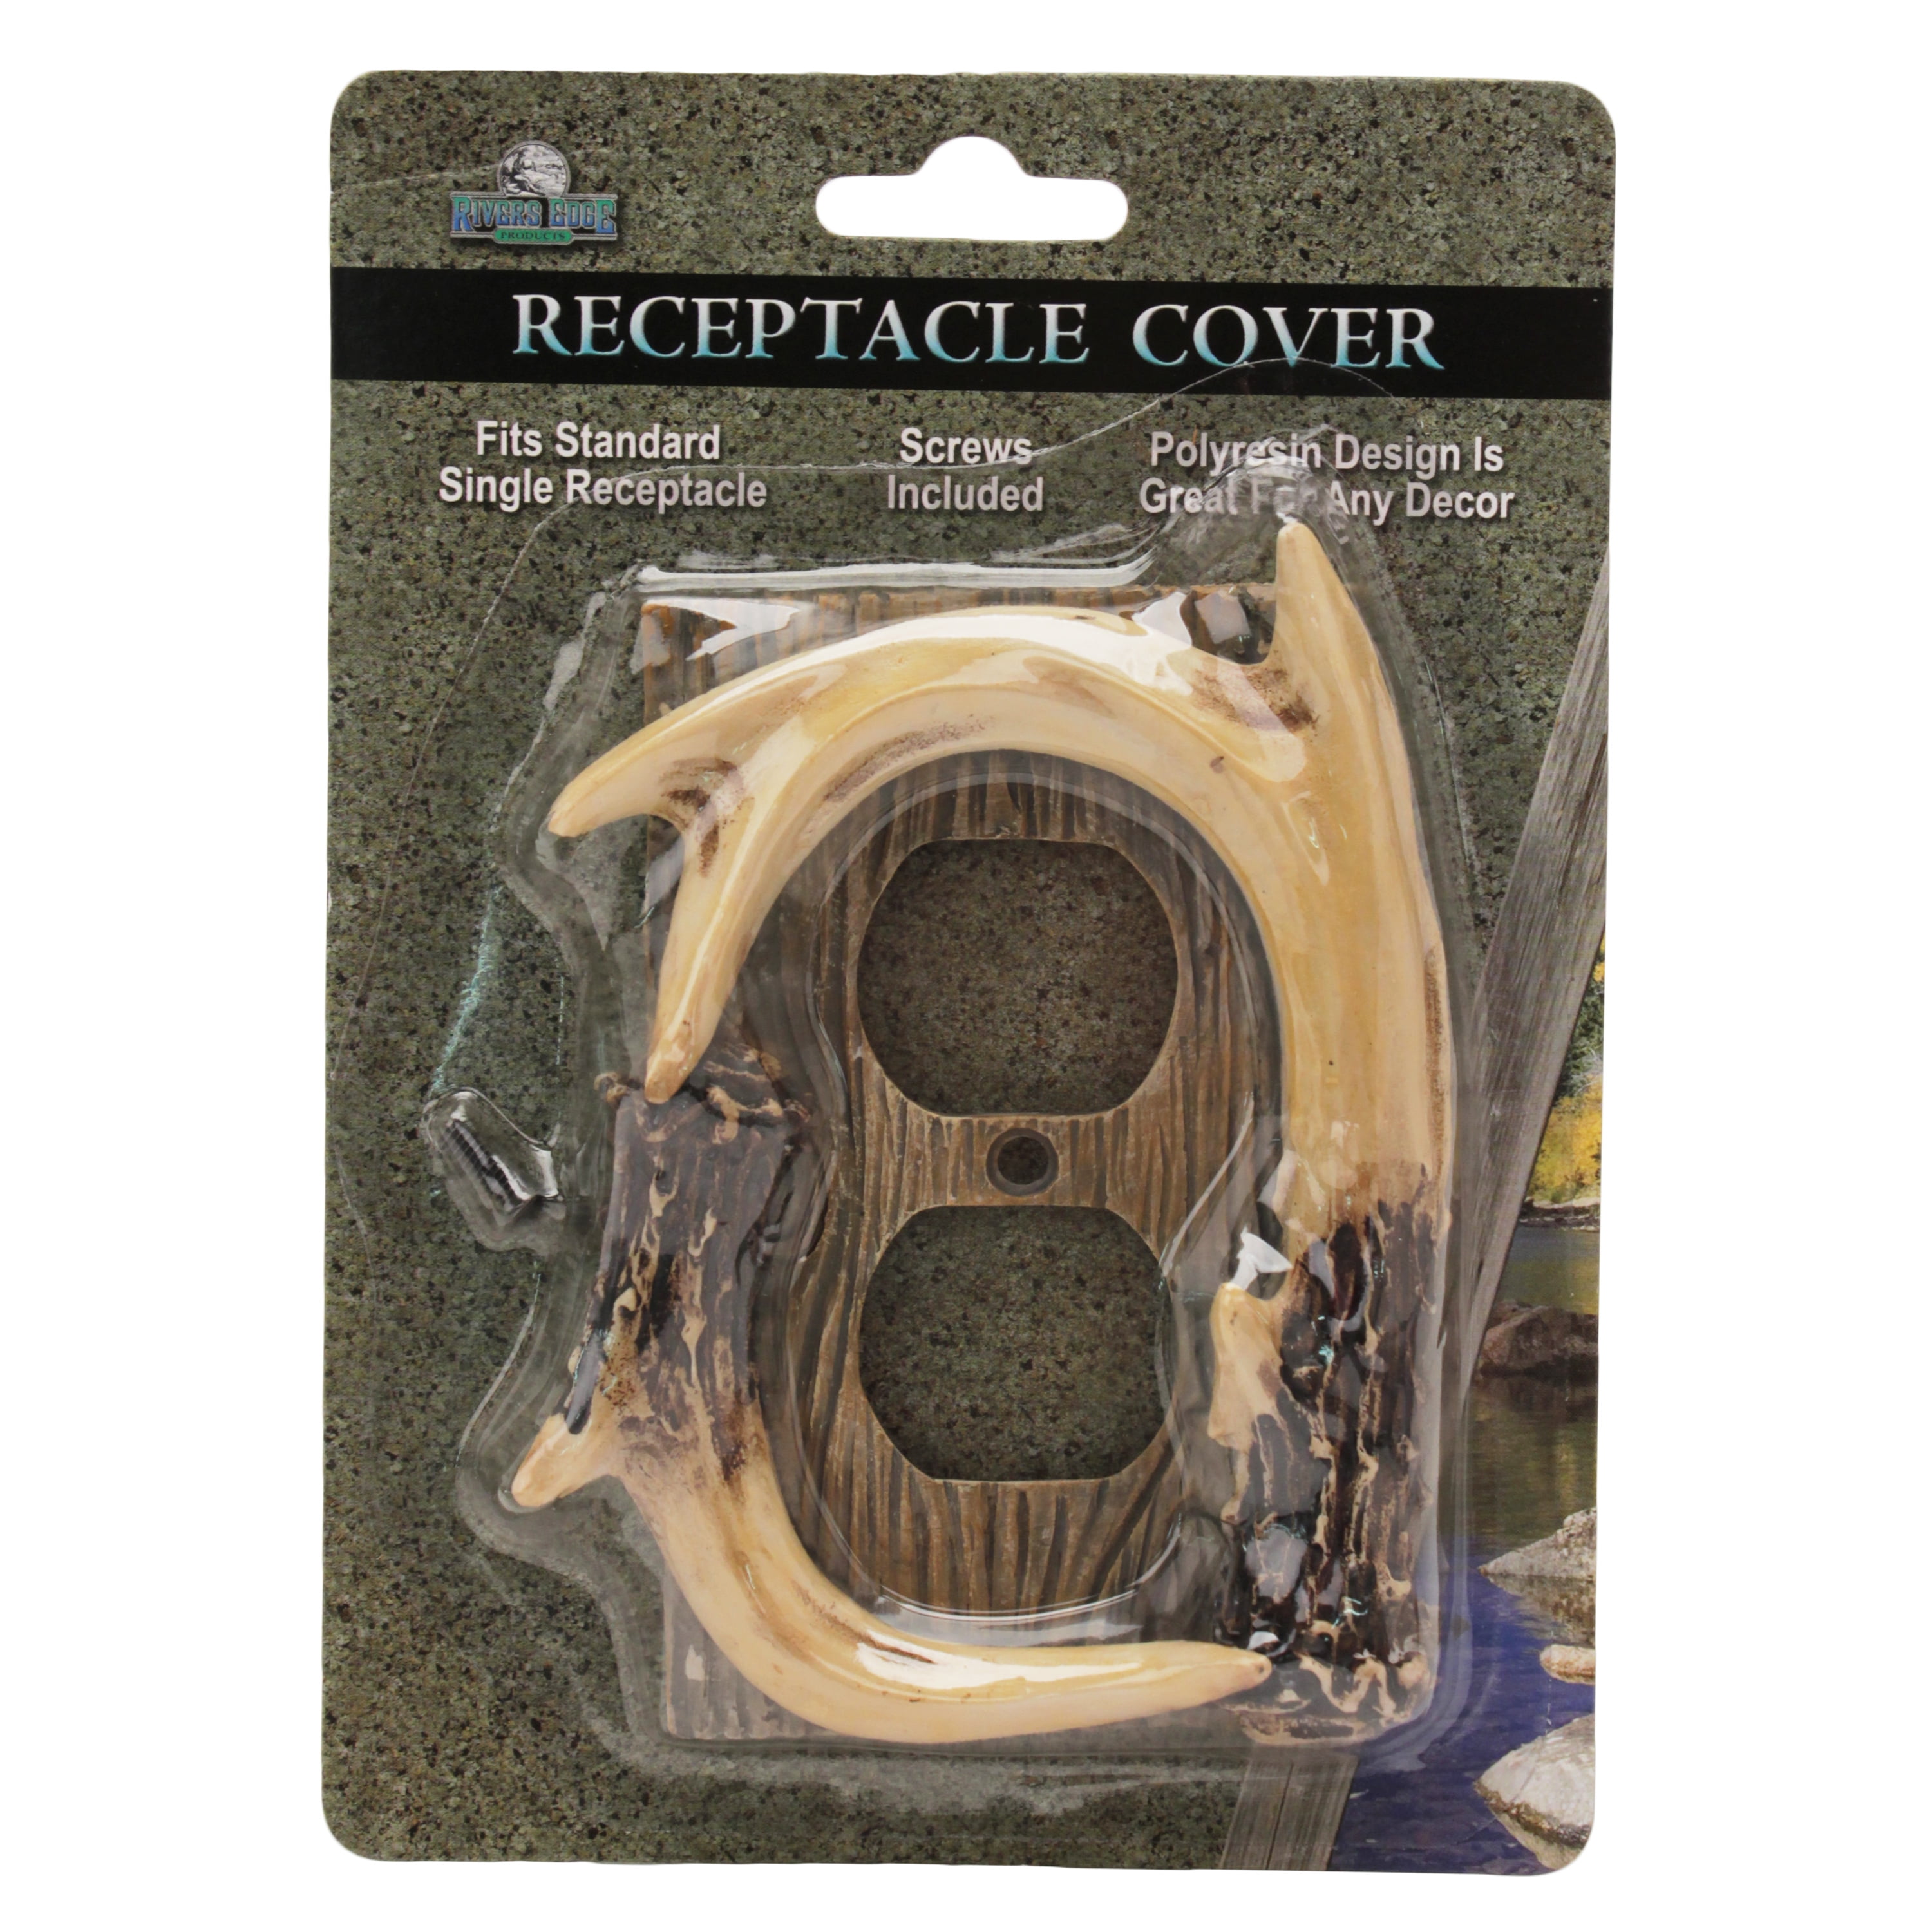 riversedge bass  light switch covers 